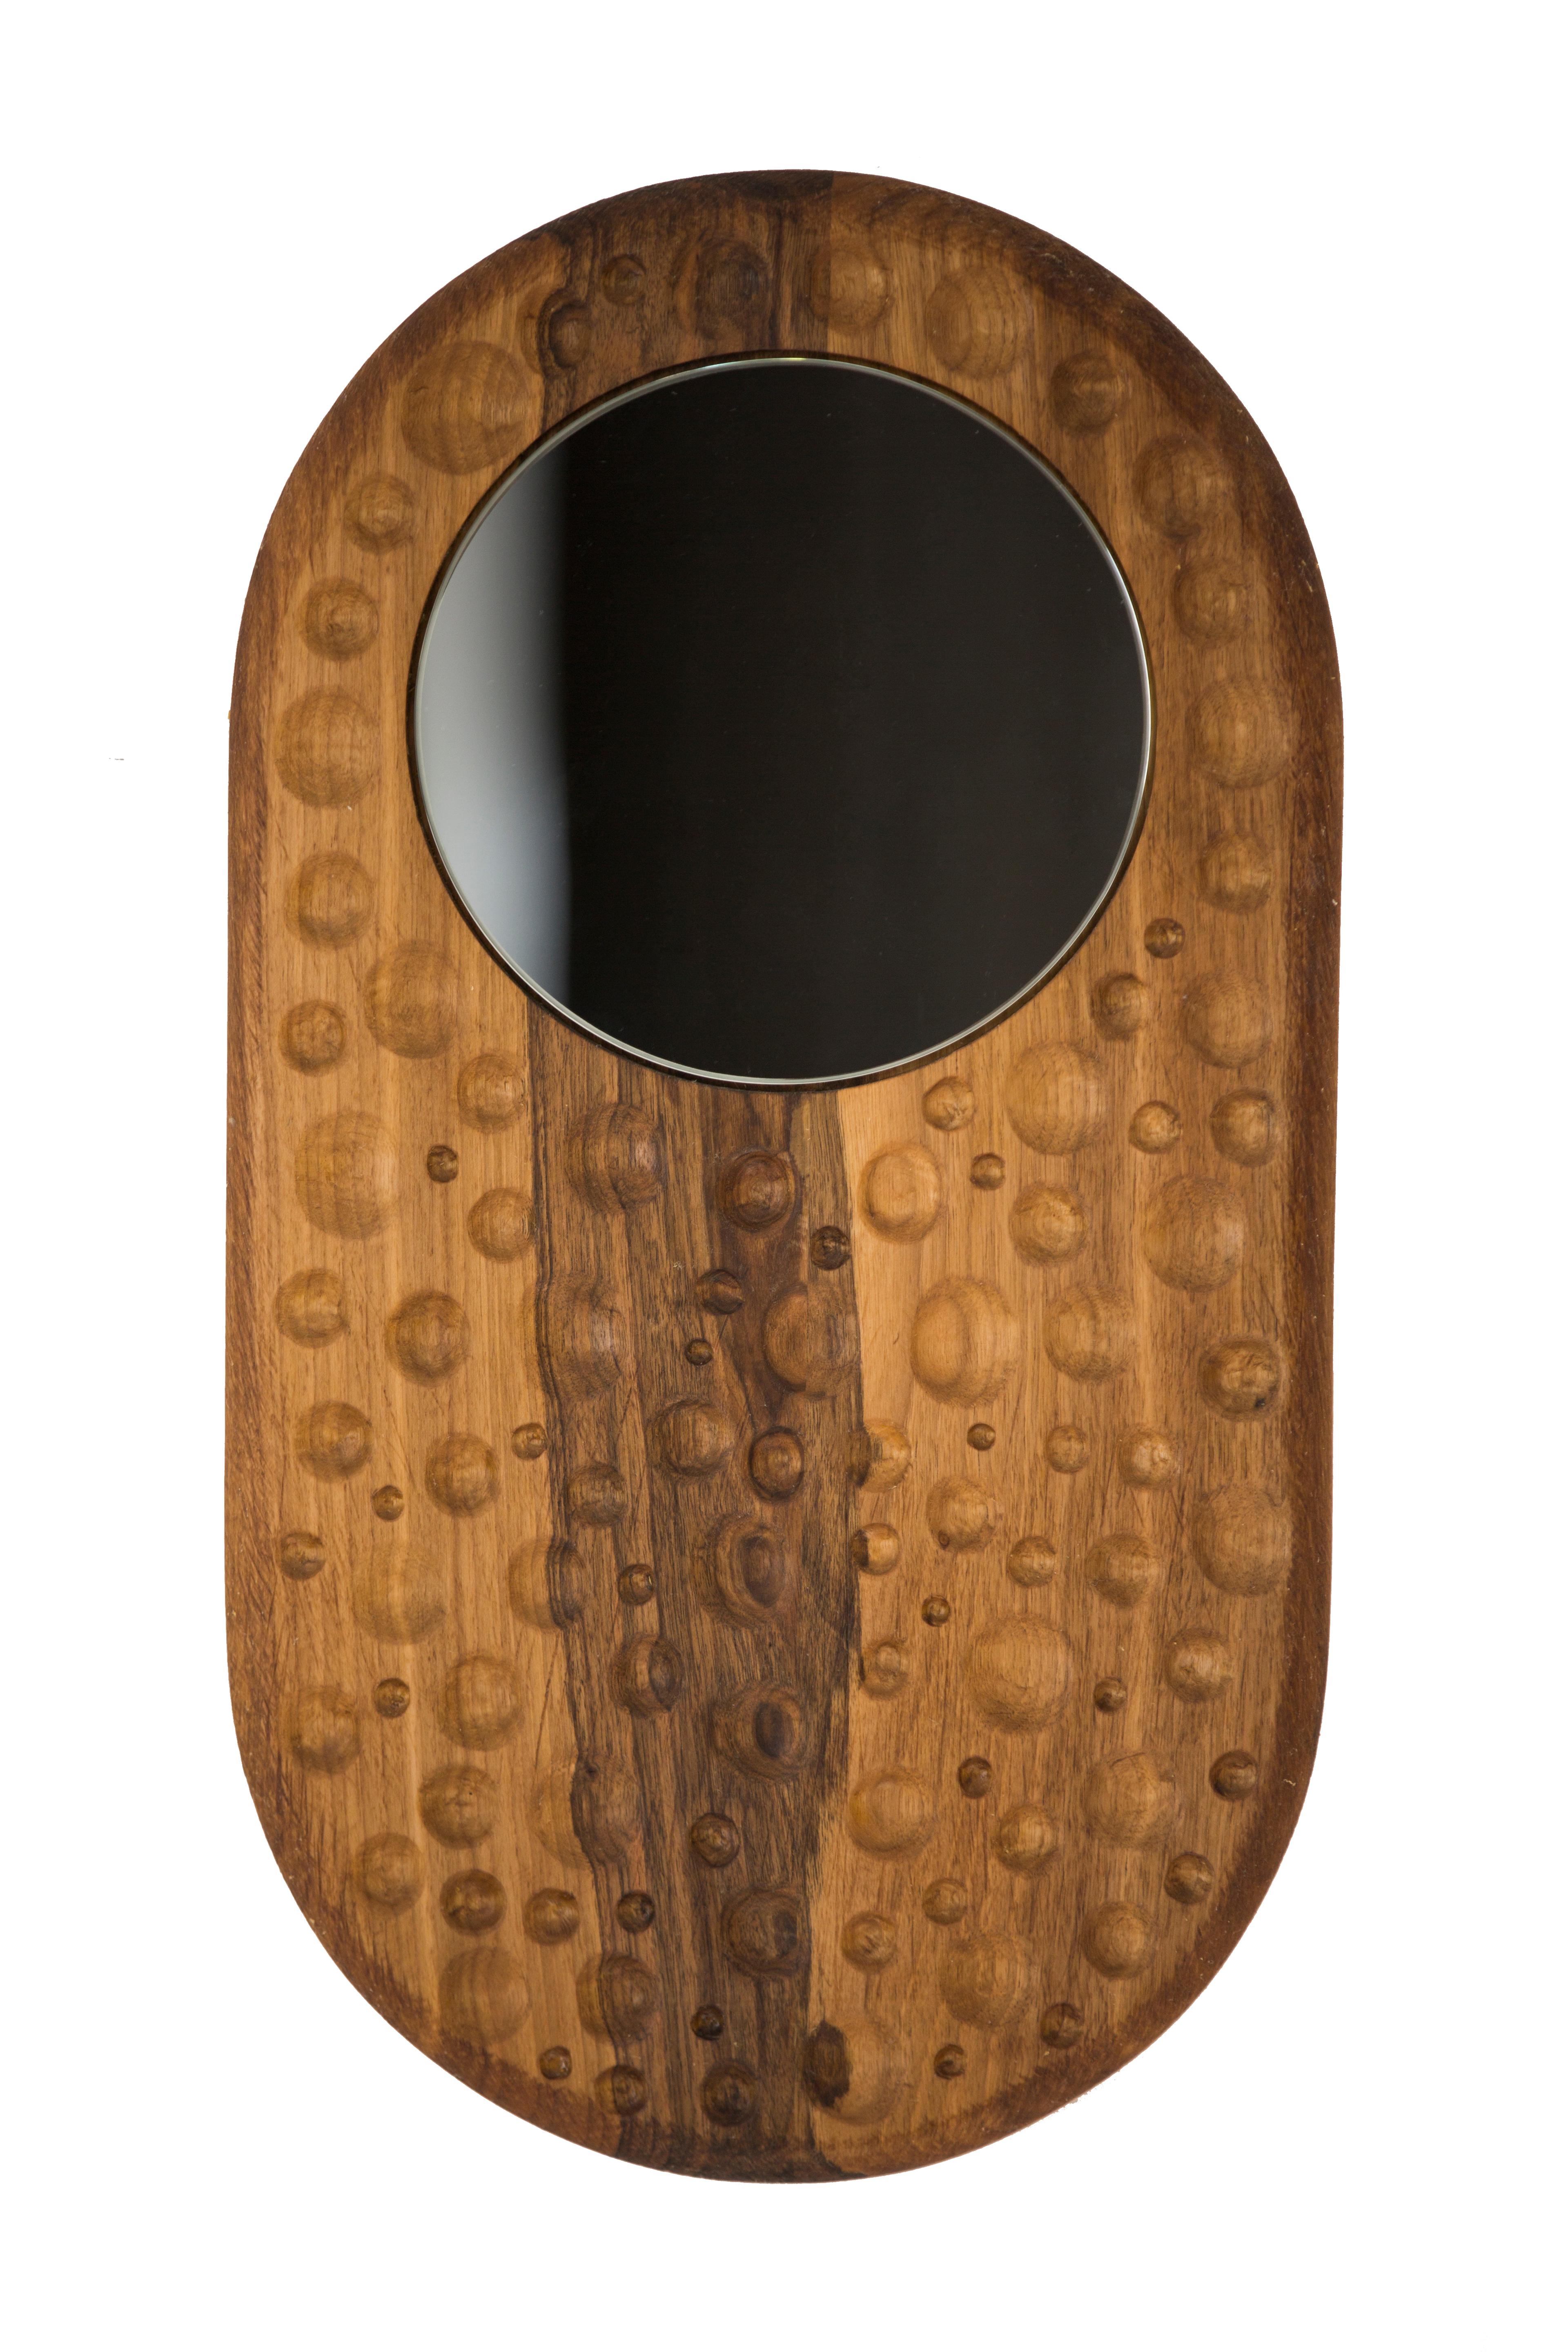 Bumerang mirror by Rectangle Studio
Dimensions: W 26 x D 2 x H 50 cm 
Materials: Massive walnut, natural wood oil, natural mirror

'Boomerang' mirror is handmade by the designer.
Each product has special differences, which are unlike the other